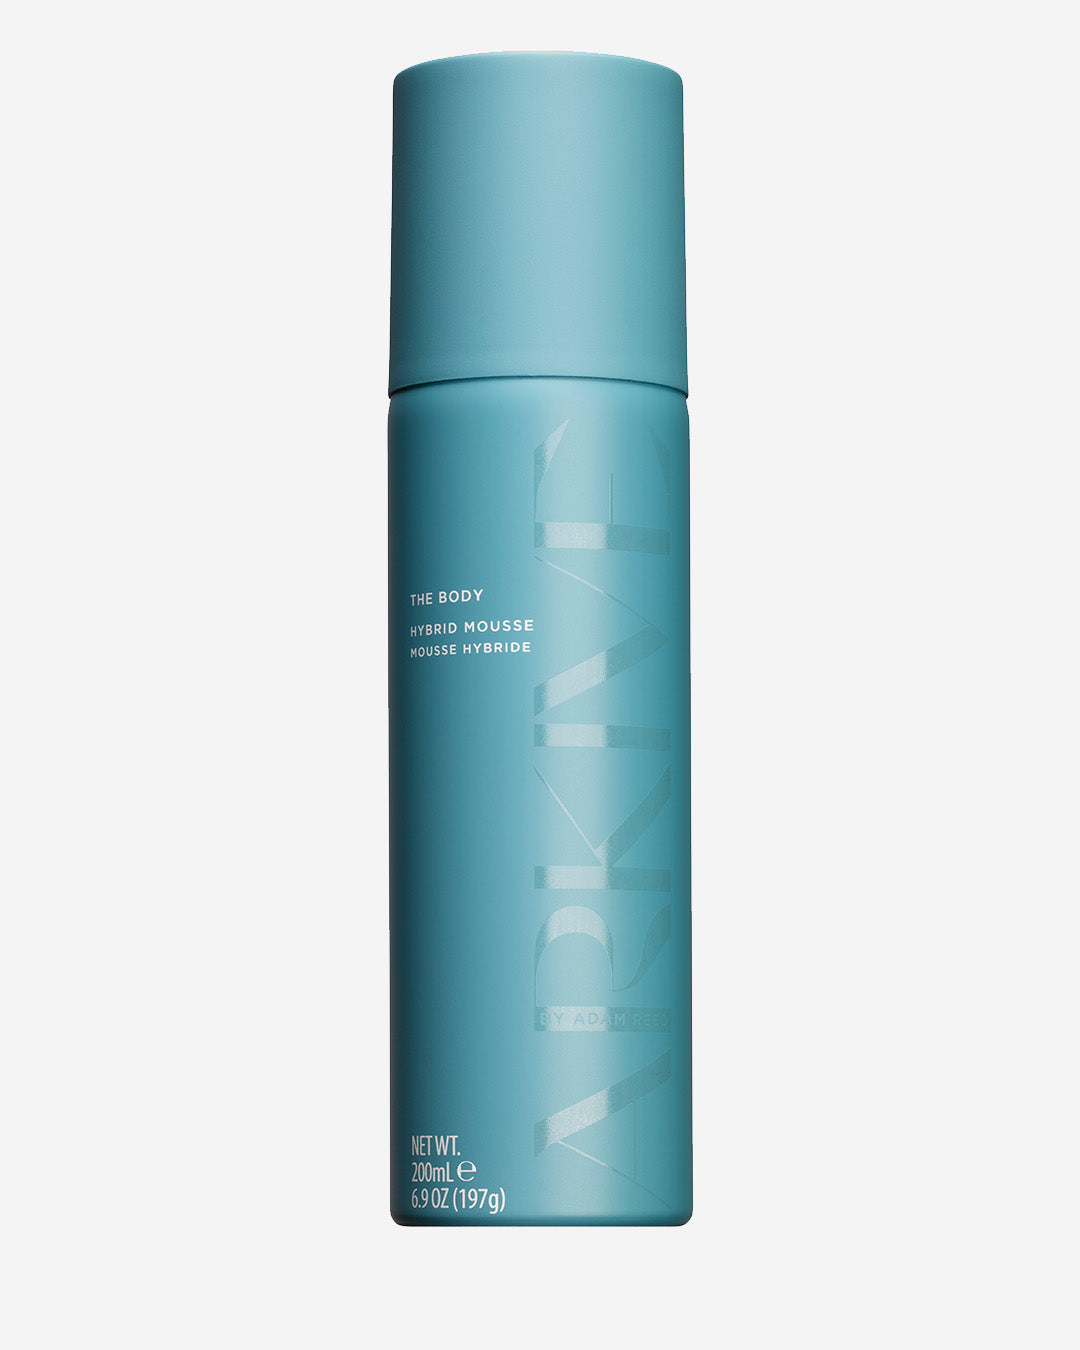 A bottle of Arkive's 'The Body' hybrid hair mousse on a white background.